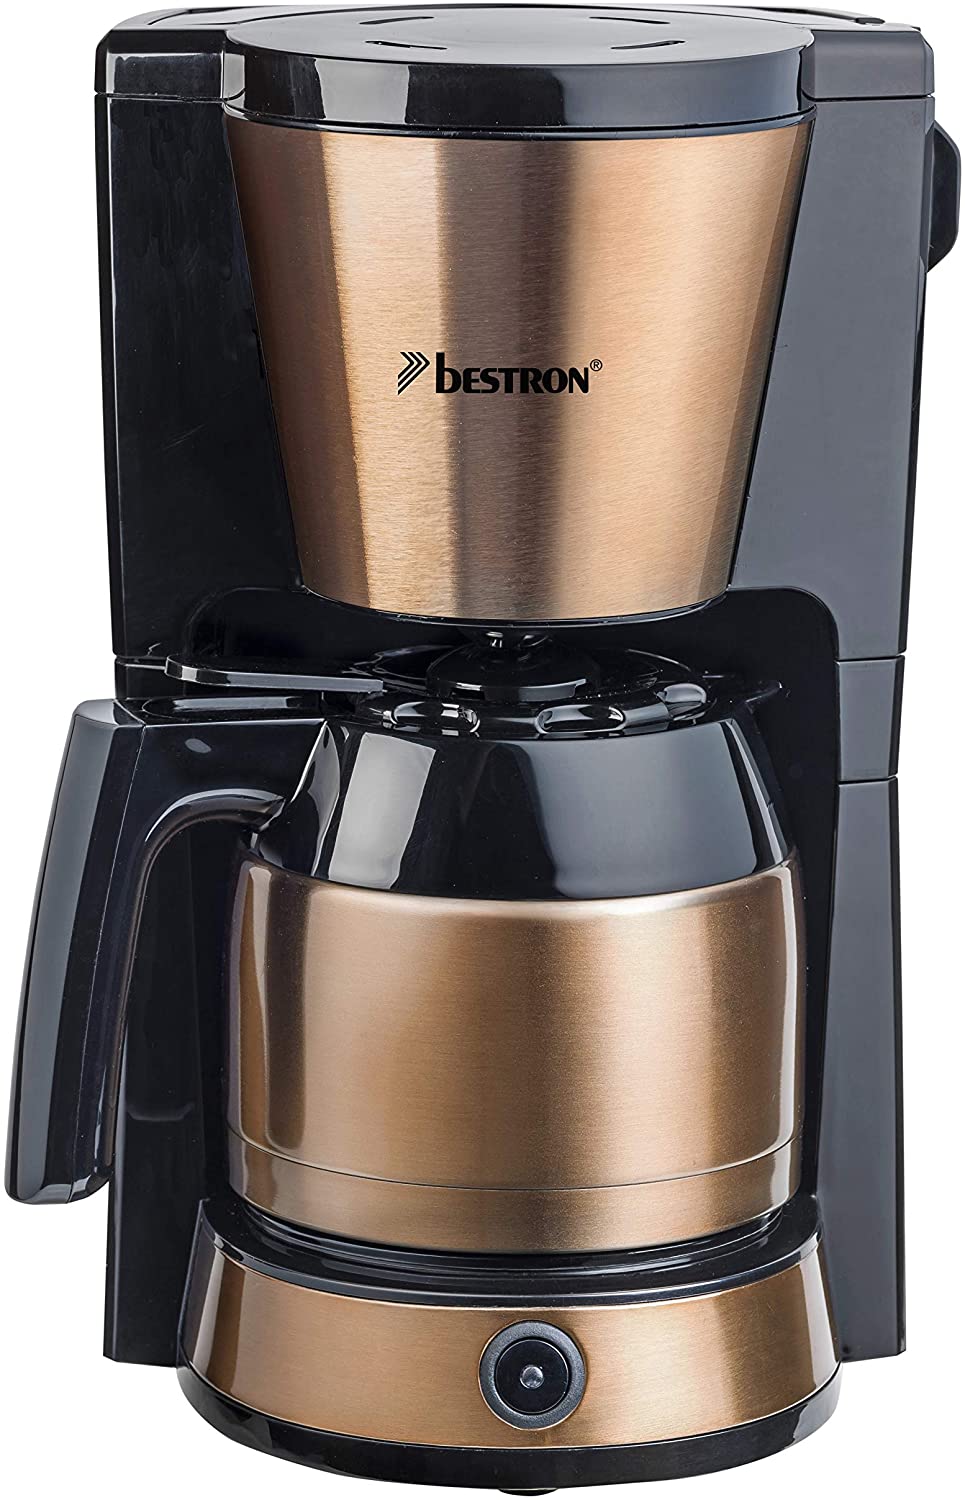 Bestron Filter Coffee Machine for 8 Cups Coffee Maker with 1 Litre Thermal Jug Includes Permanent Filter & Automatic Shut-Off 900W Copper